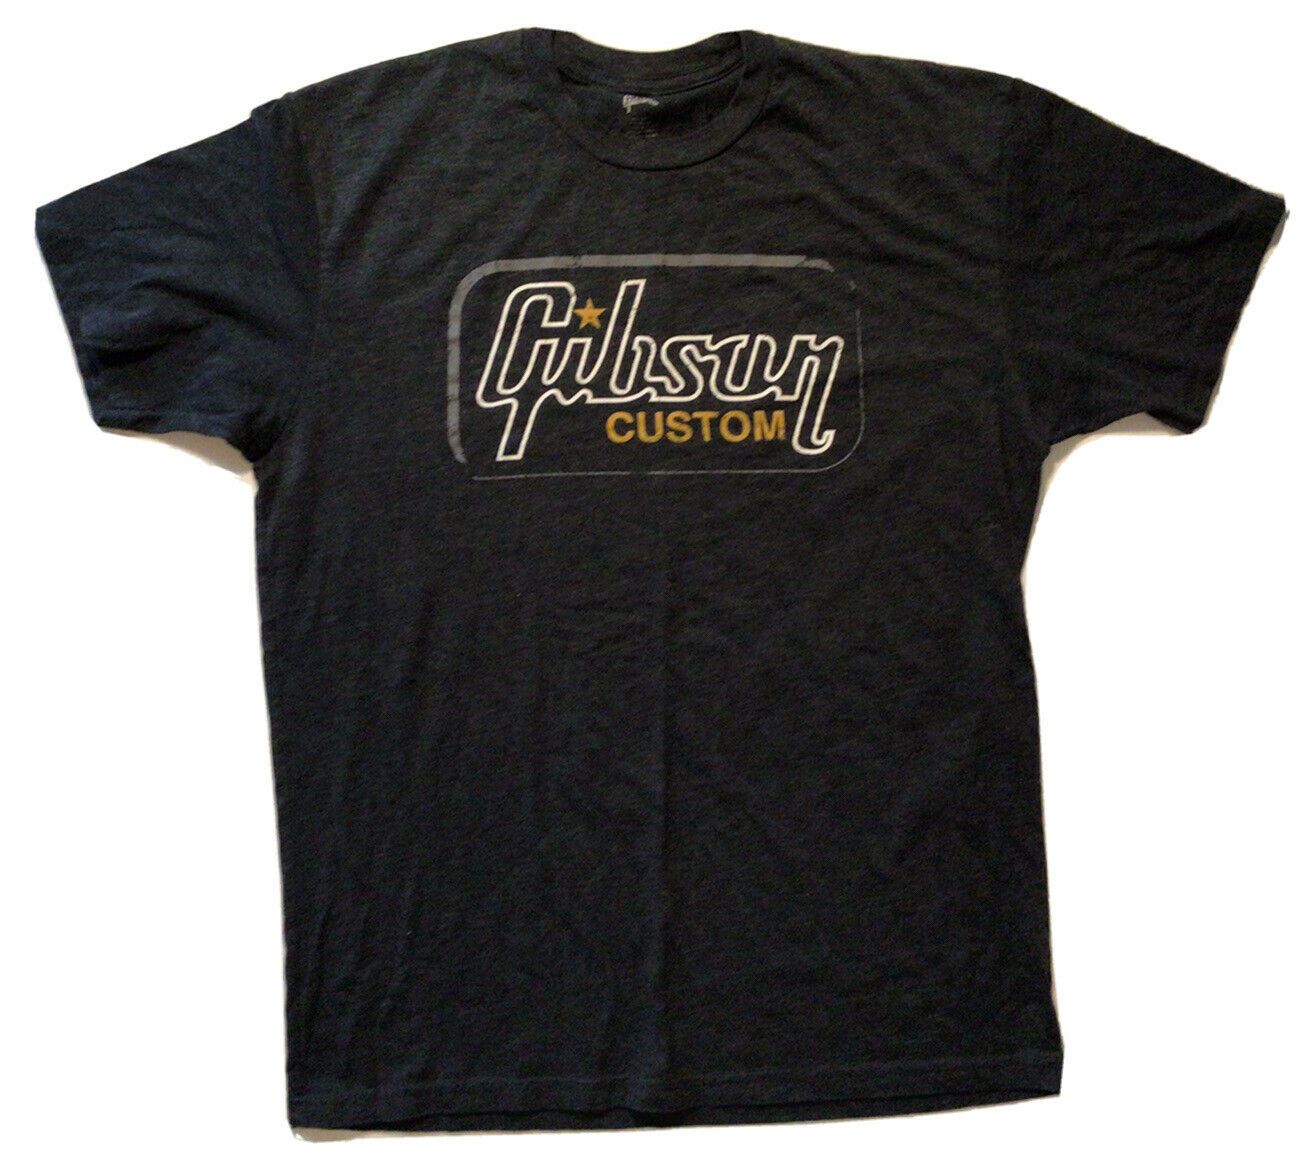 Gibson T-shirt Custom T Heathered Gray Men’s Large Excellent Condition